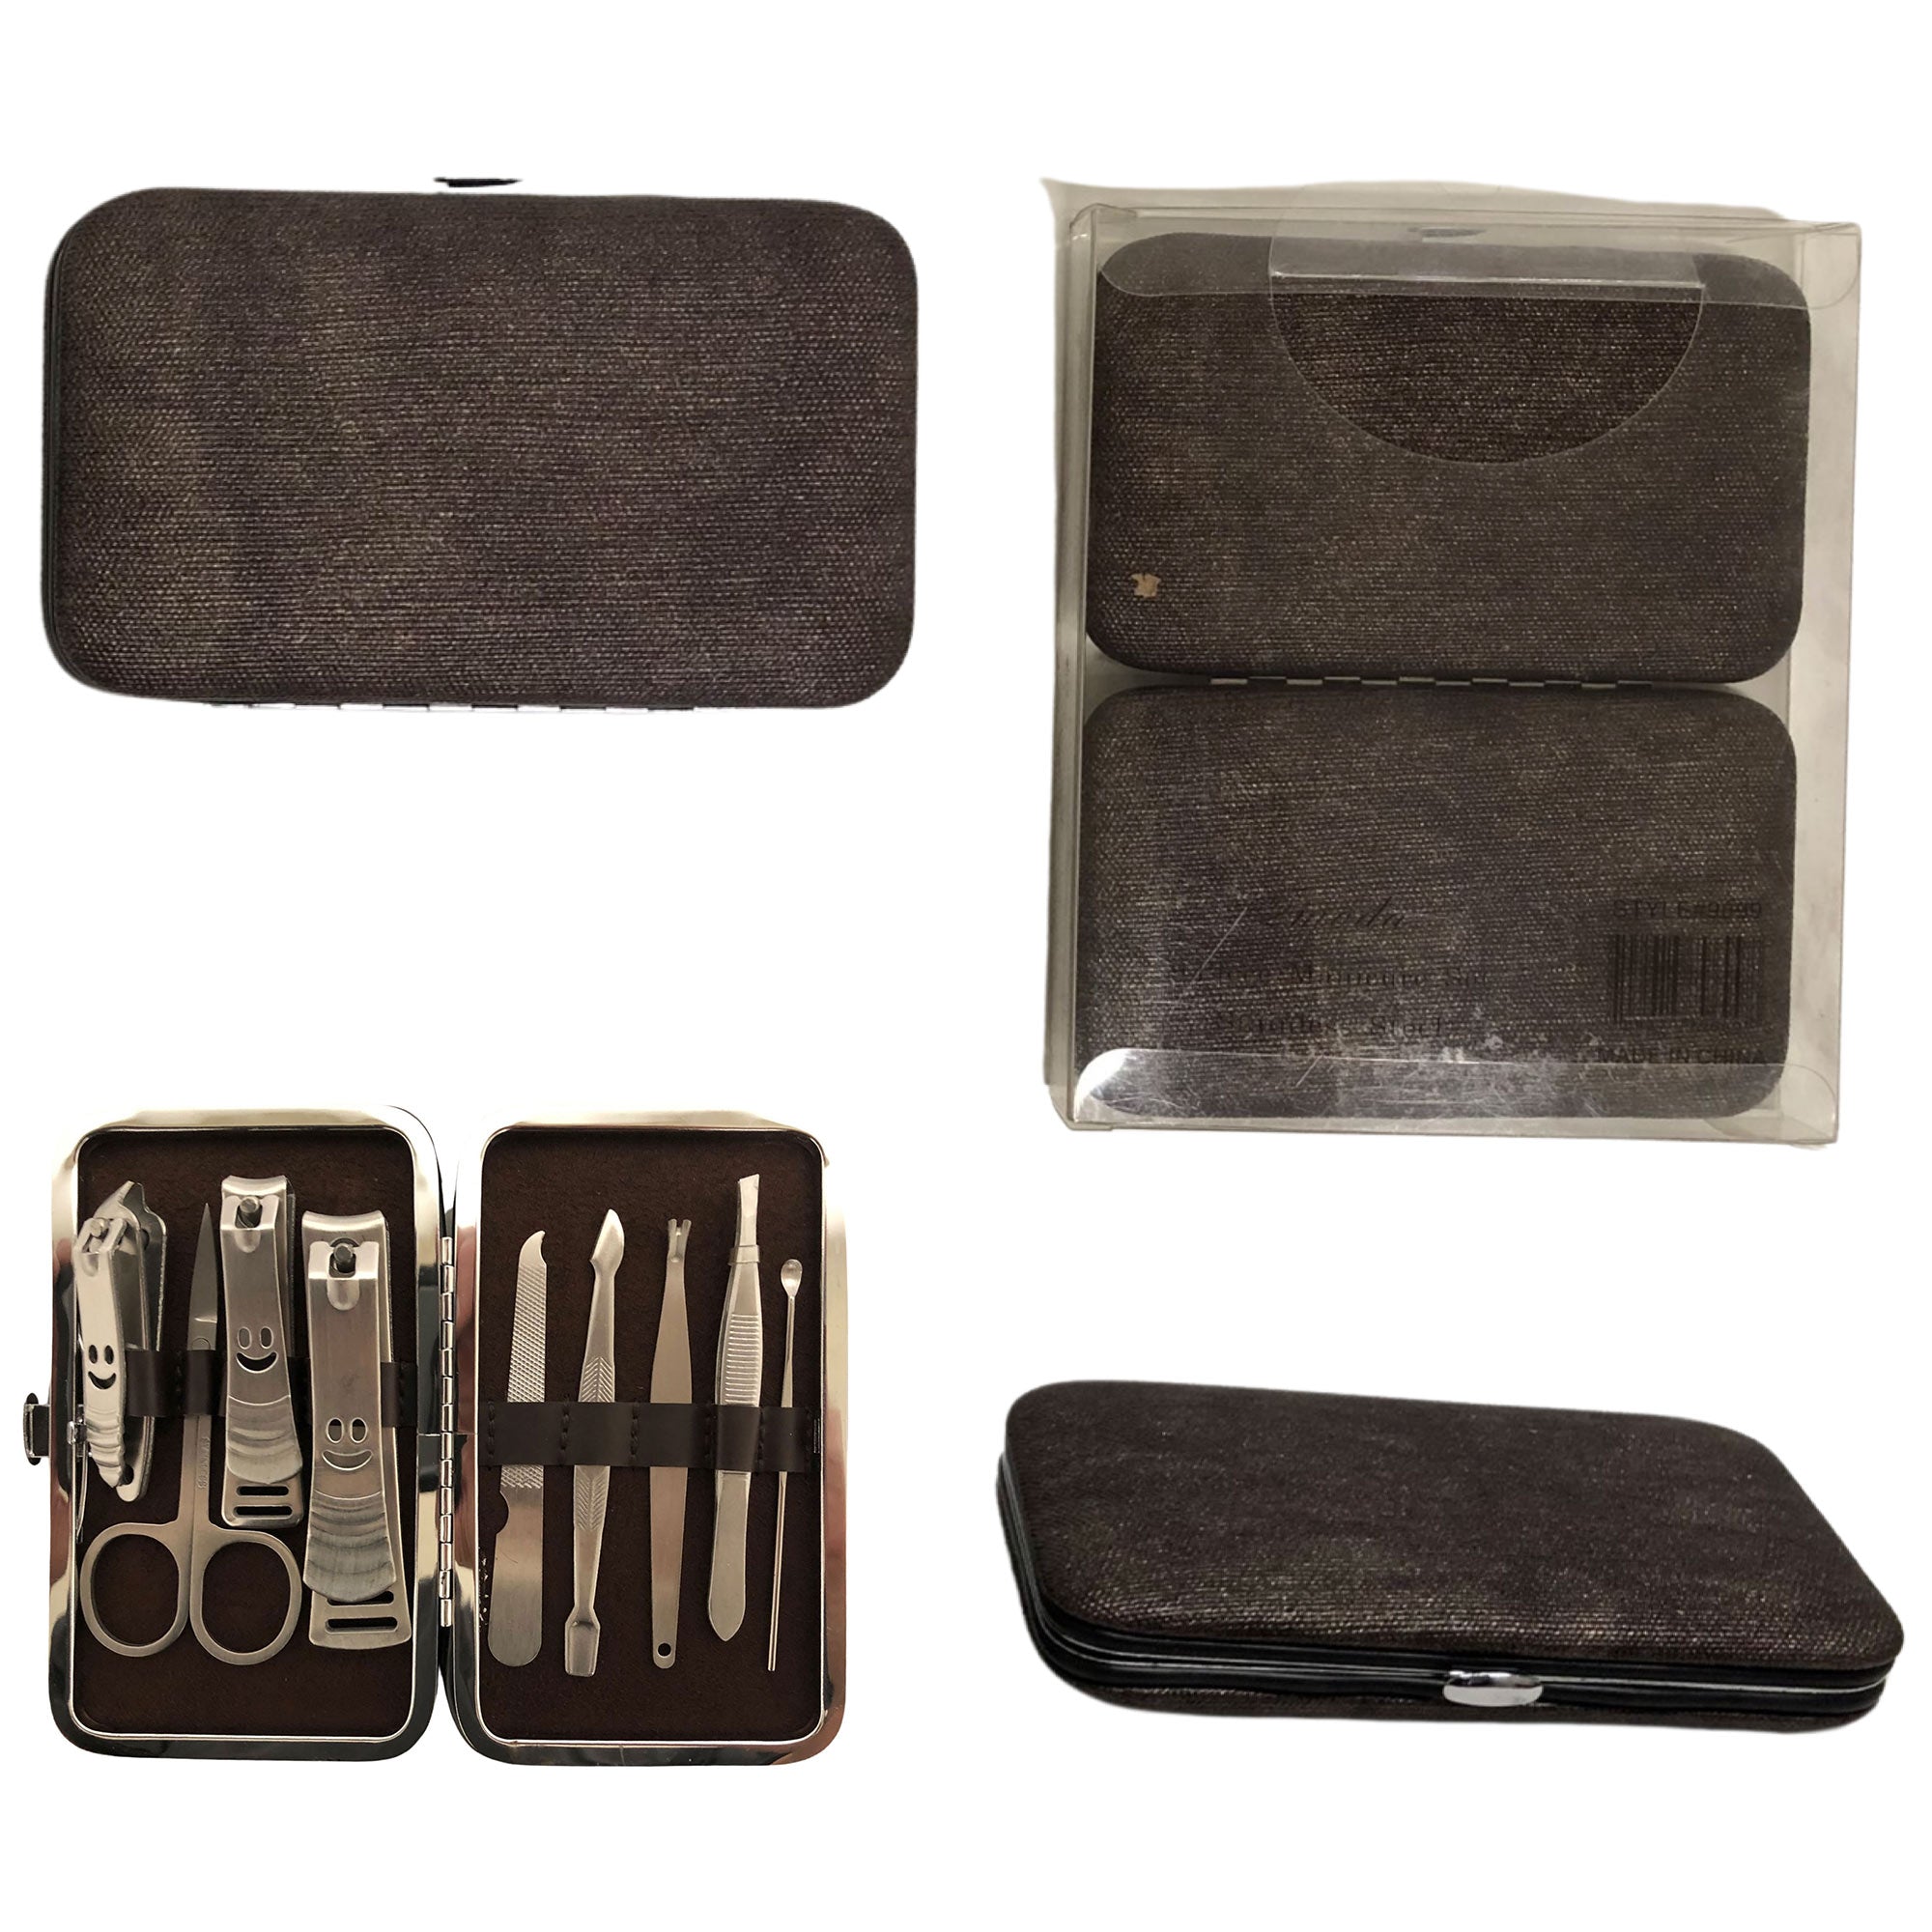 CLEARANCE MANICURE SET IN BROWN CASE (CASE OF 24 - $2.50 / PIECE)  Wholesale 9 Piece Stainless Steel Manicure Set in Brown SKU: 9699-9019-SMT-BROWN-24